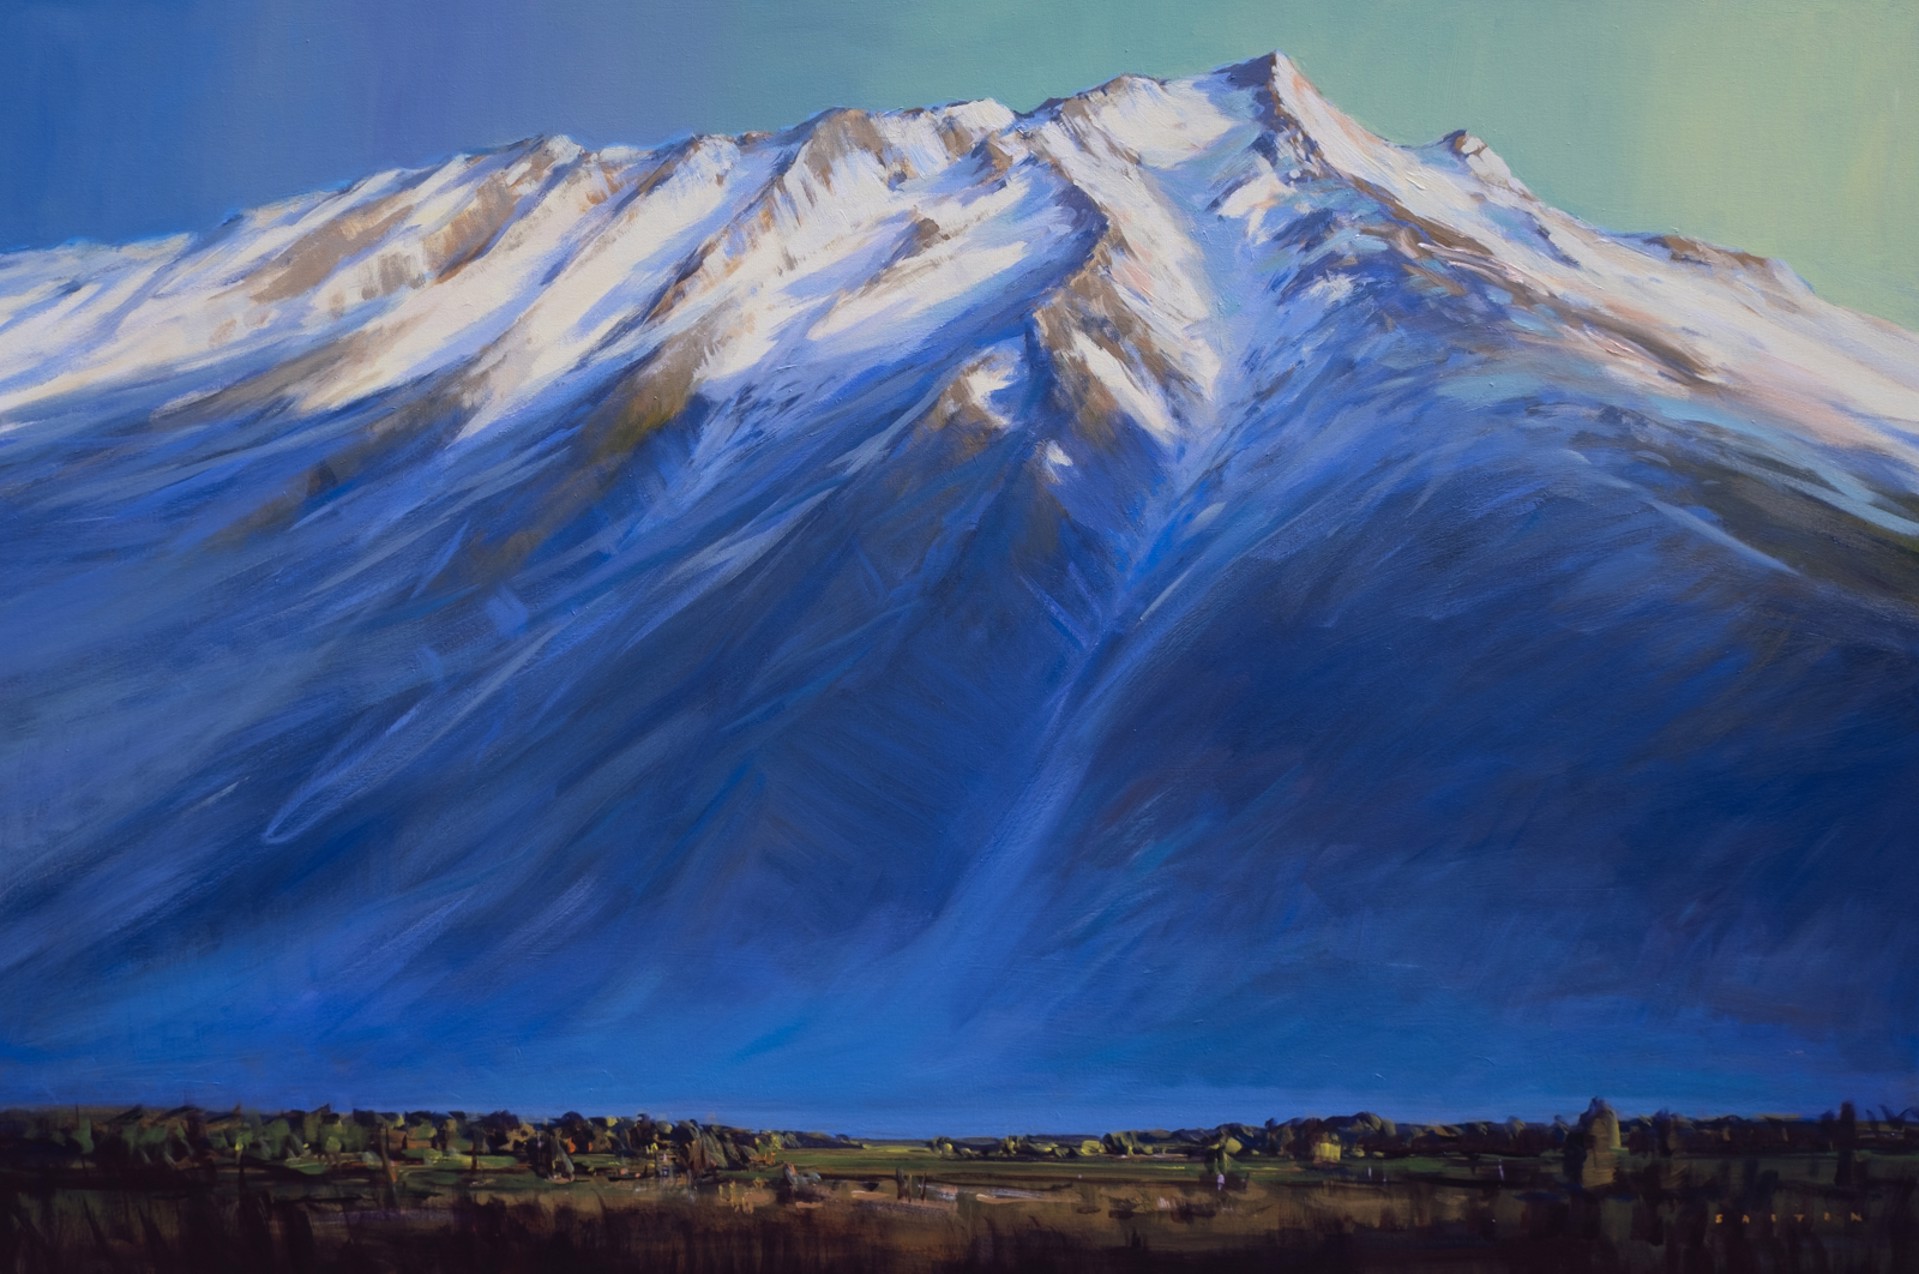 Mount Currie from the Valley by Charlie Easton